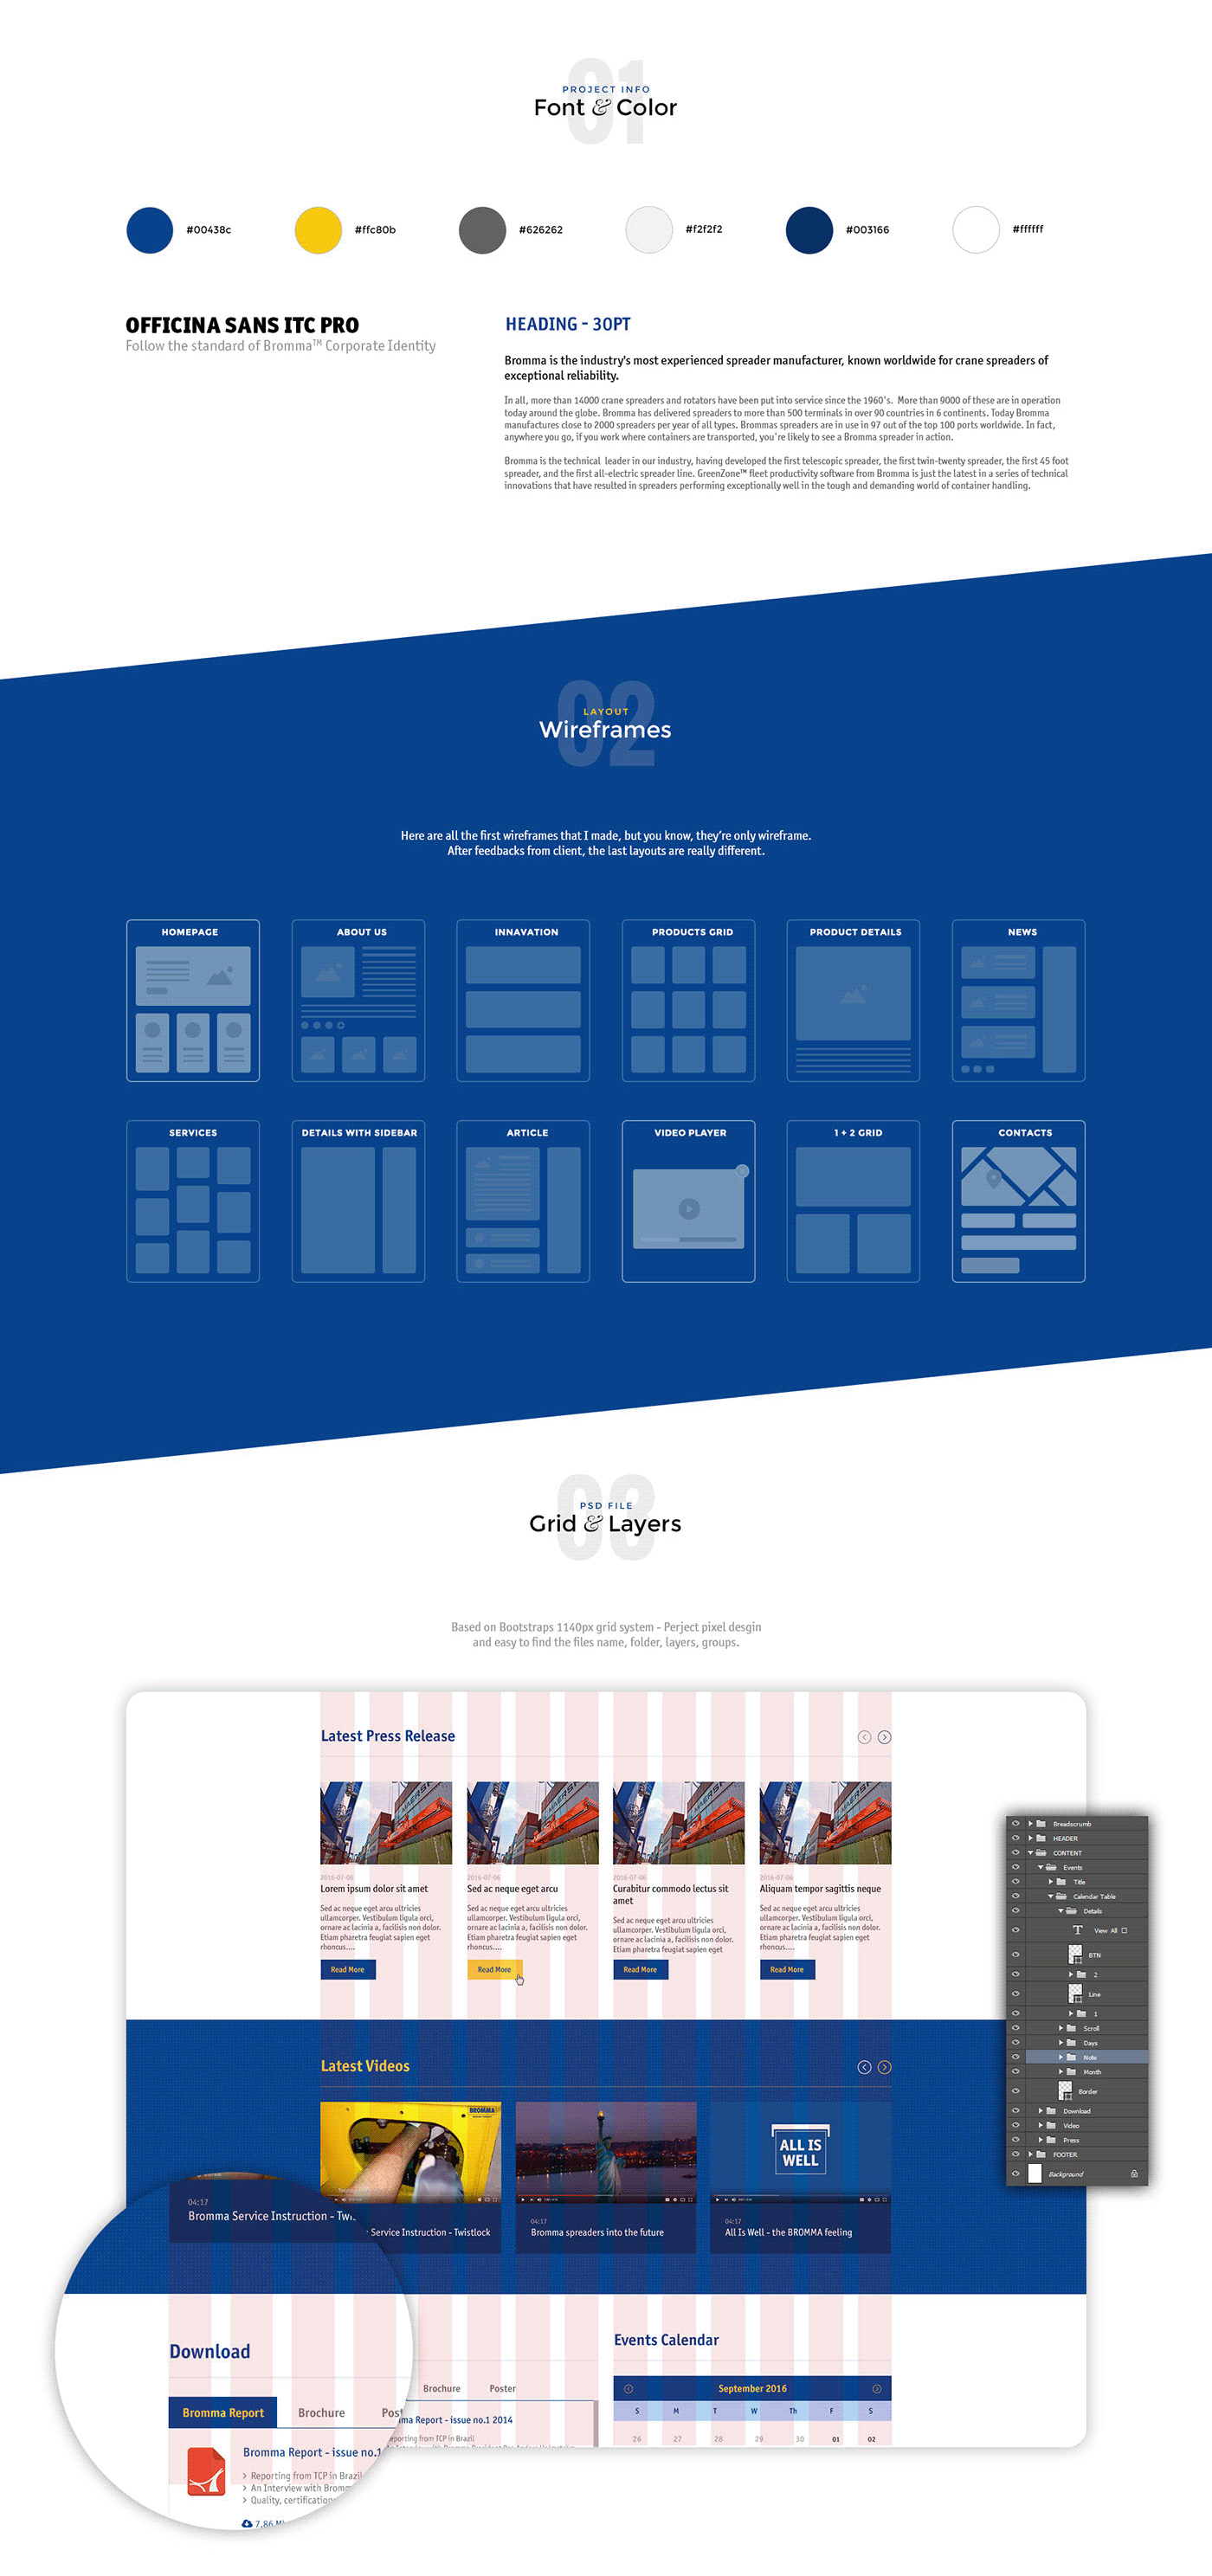 Web redesign interaction spreaders ship container Logistics landing UI/UX